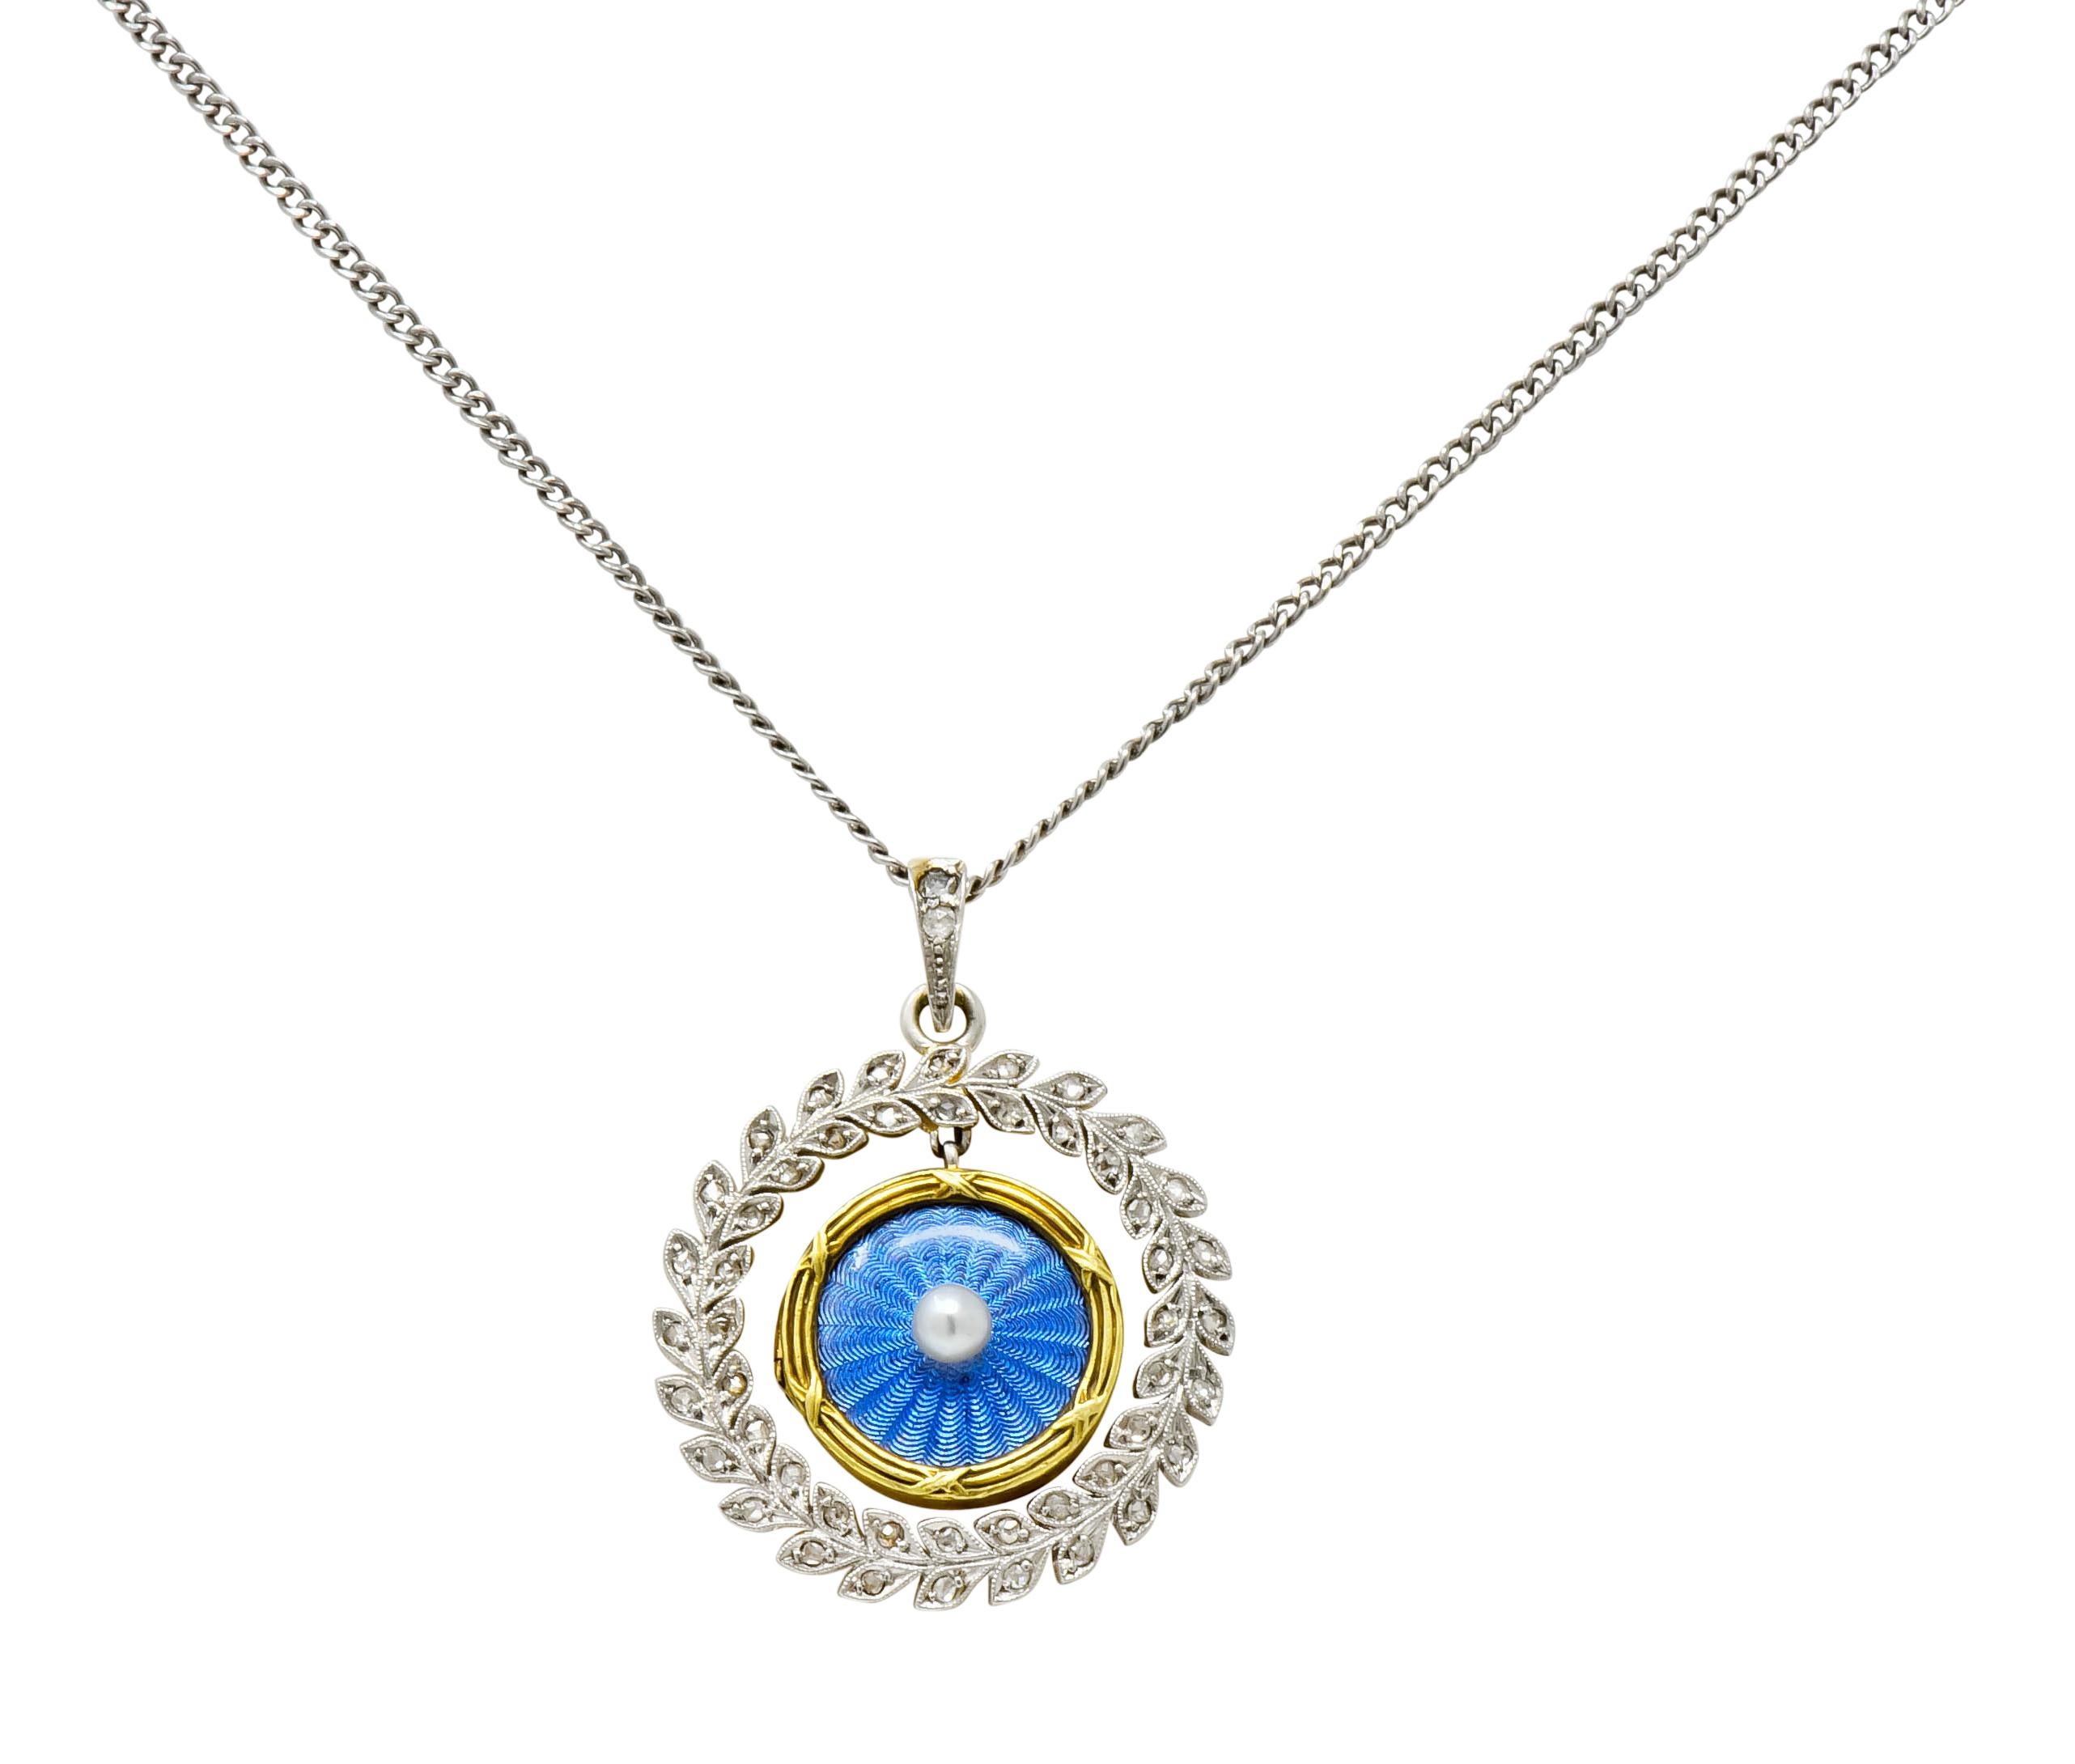 Locket centers a round button pearl measuring approximately 3.0 mm; cream in body color with excellent luster

Surrounded by cornflower blue enamel featuring a scalloped radiating motif encased by glass and a ridged gold surround

Back is clear